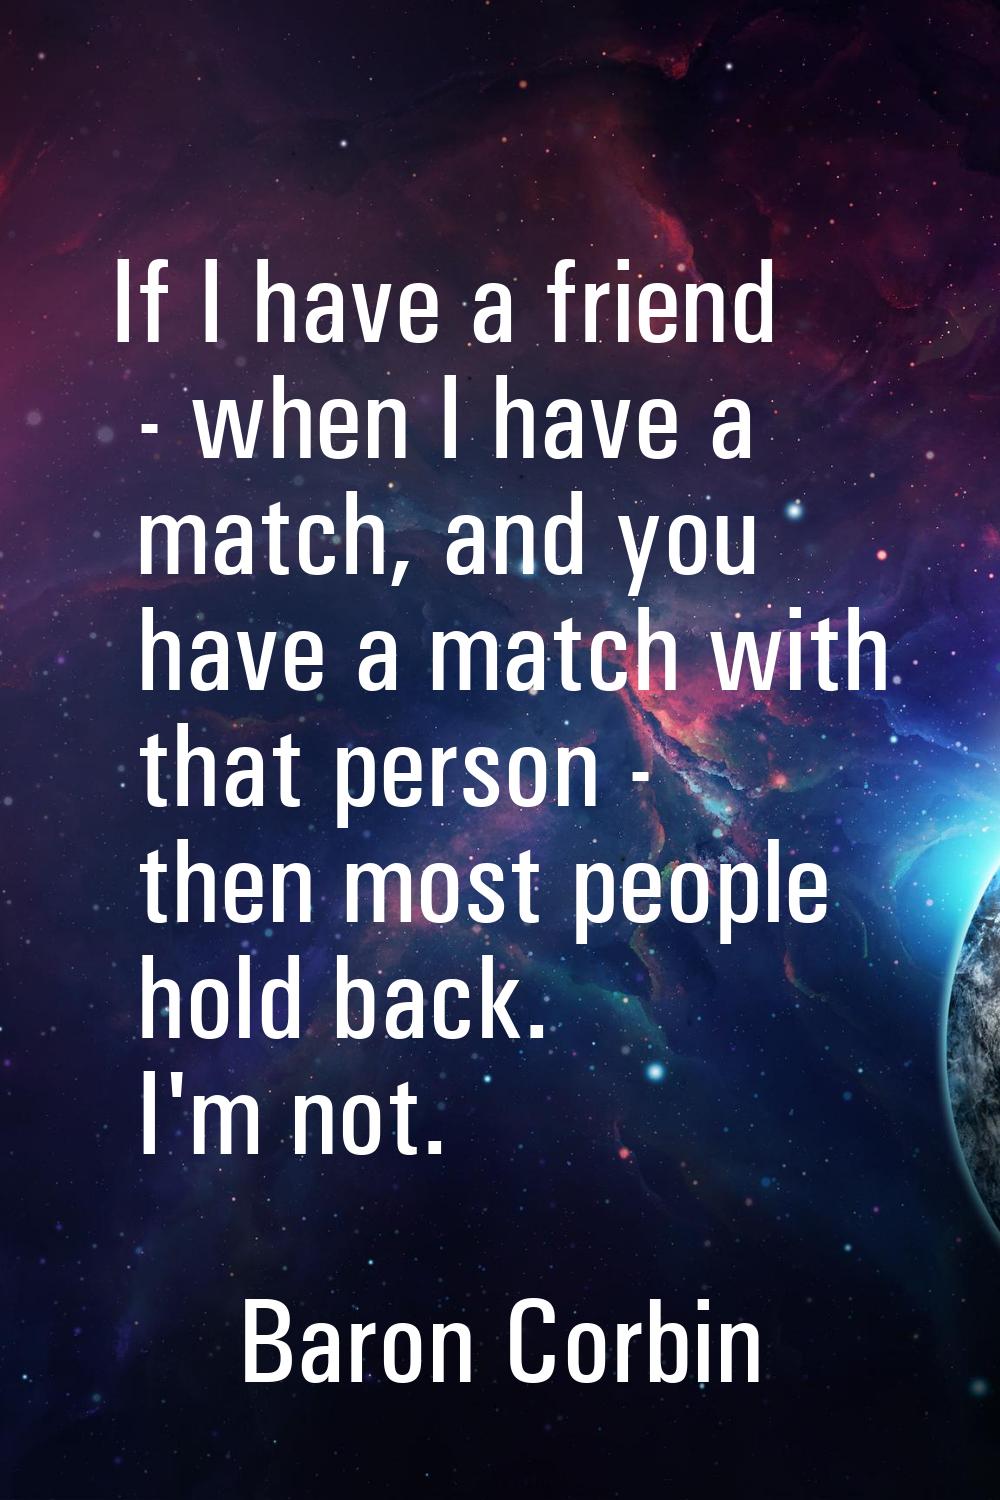 If I have a friend - when I have a match, and you have a match with that person - then most people 